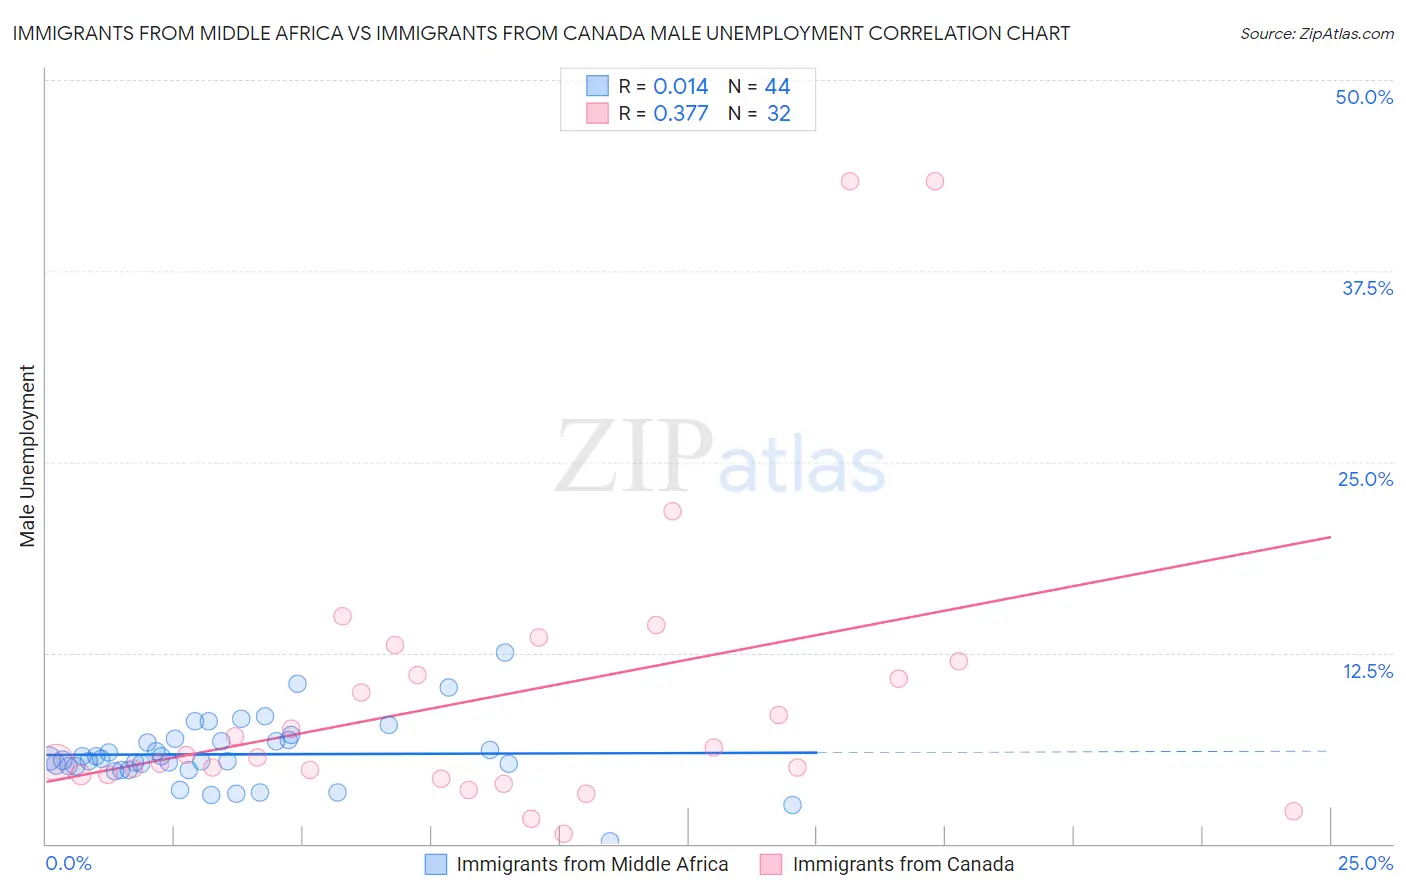 Immigrants from Middle Africa vs Immigrants from Canada Male Unemployment